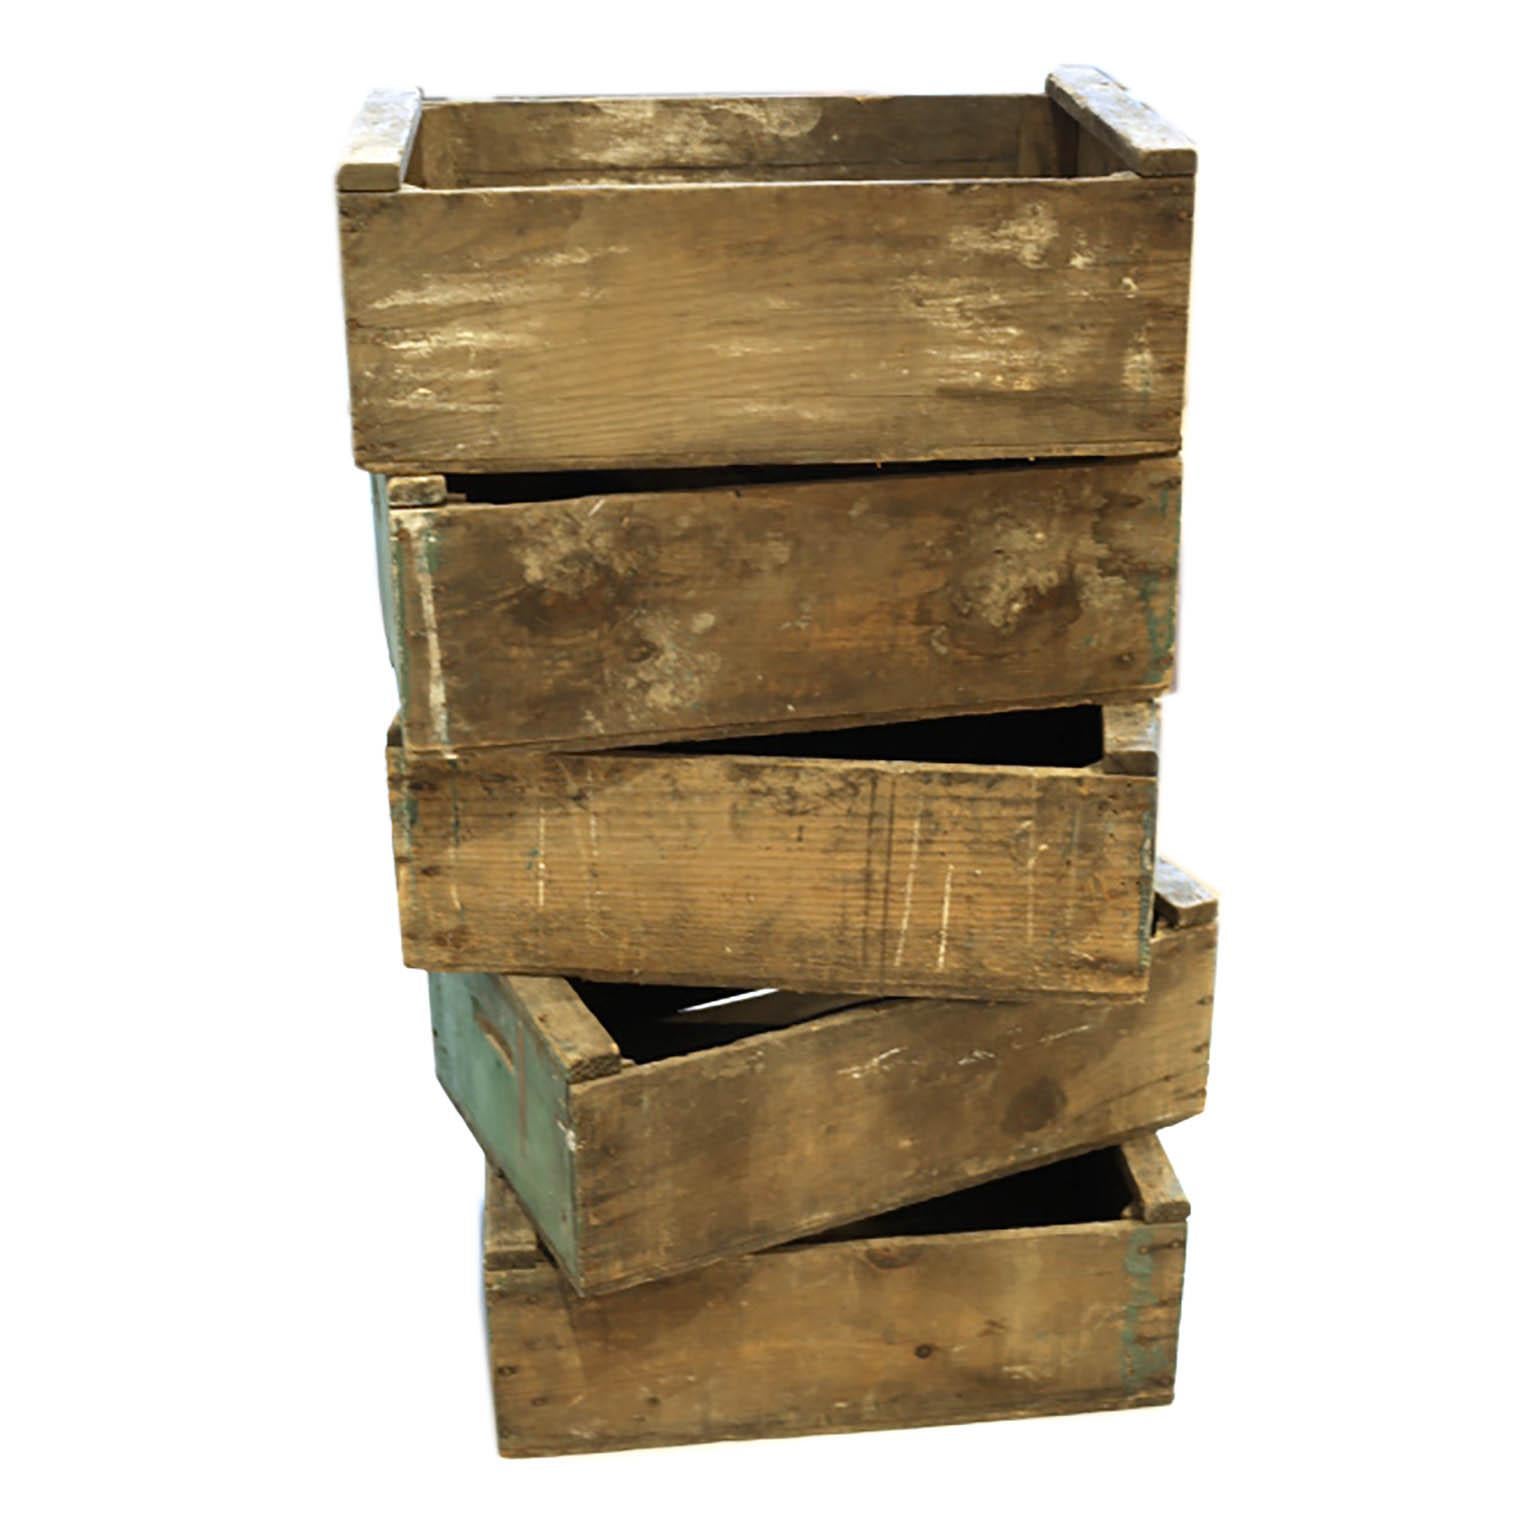 Painted Collection of Rustic Green Wooden Boxes, circa 1940s